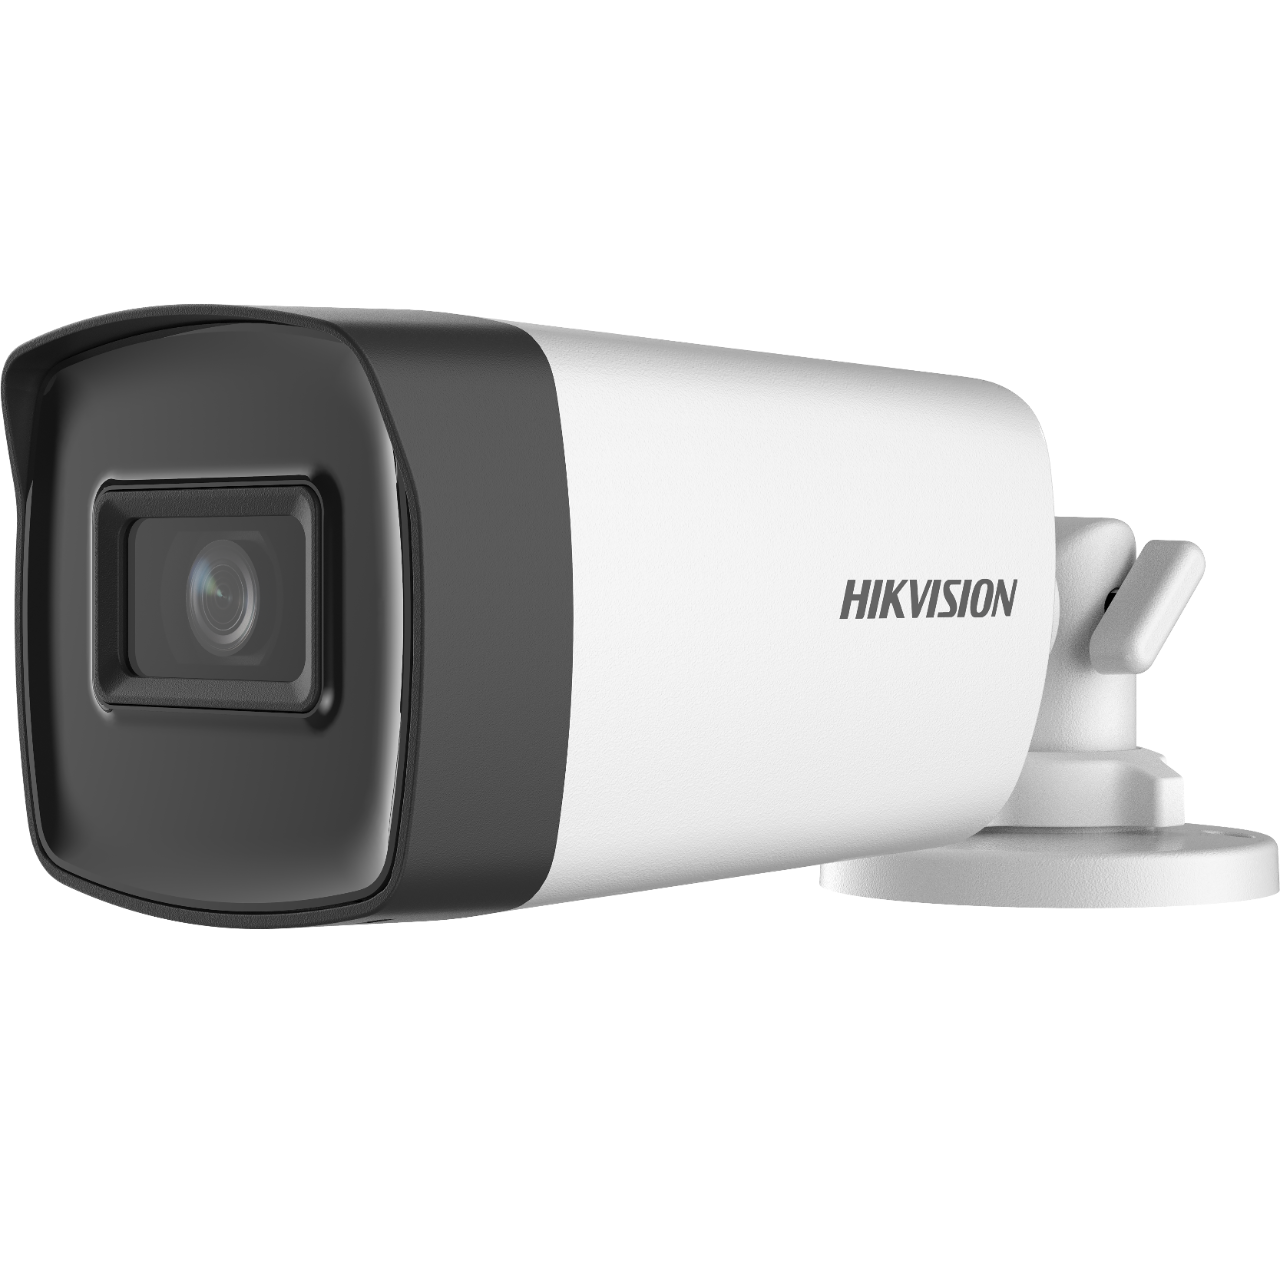 Hikvision (DS-2CE17H0T-IT5F) 5 MP Fixed Bullet Camera